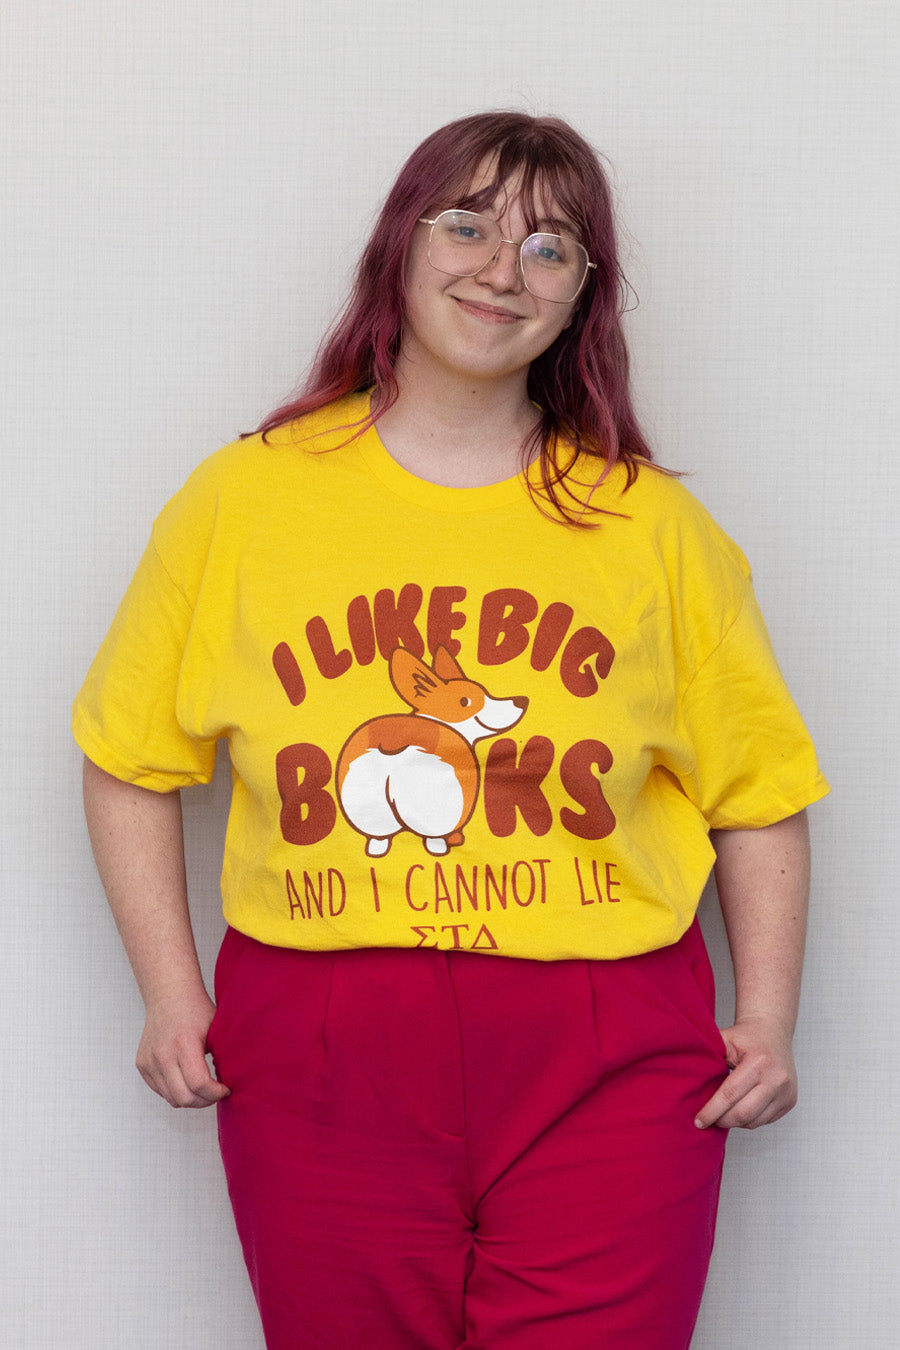 Big Books Tee (Multiple Colors Available)